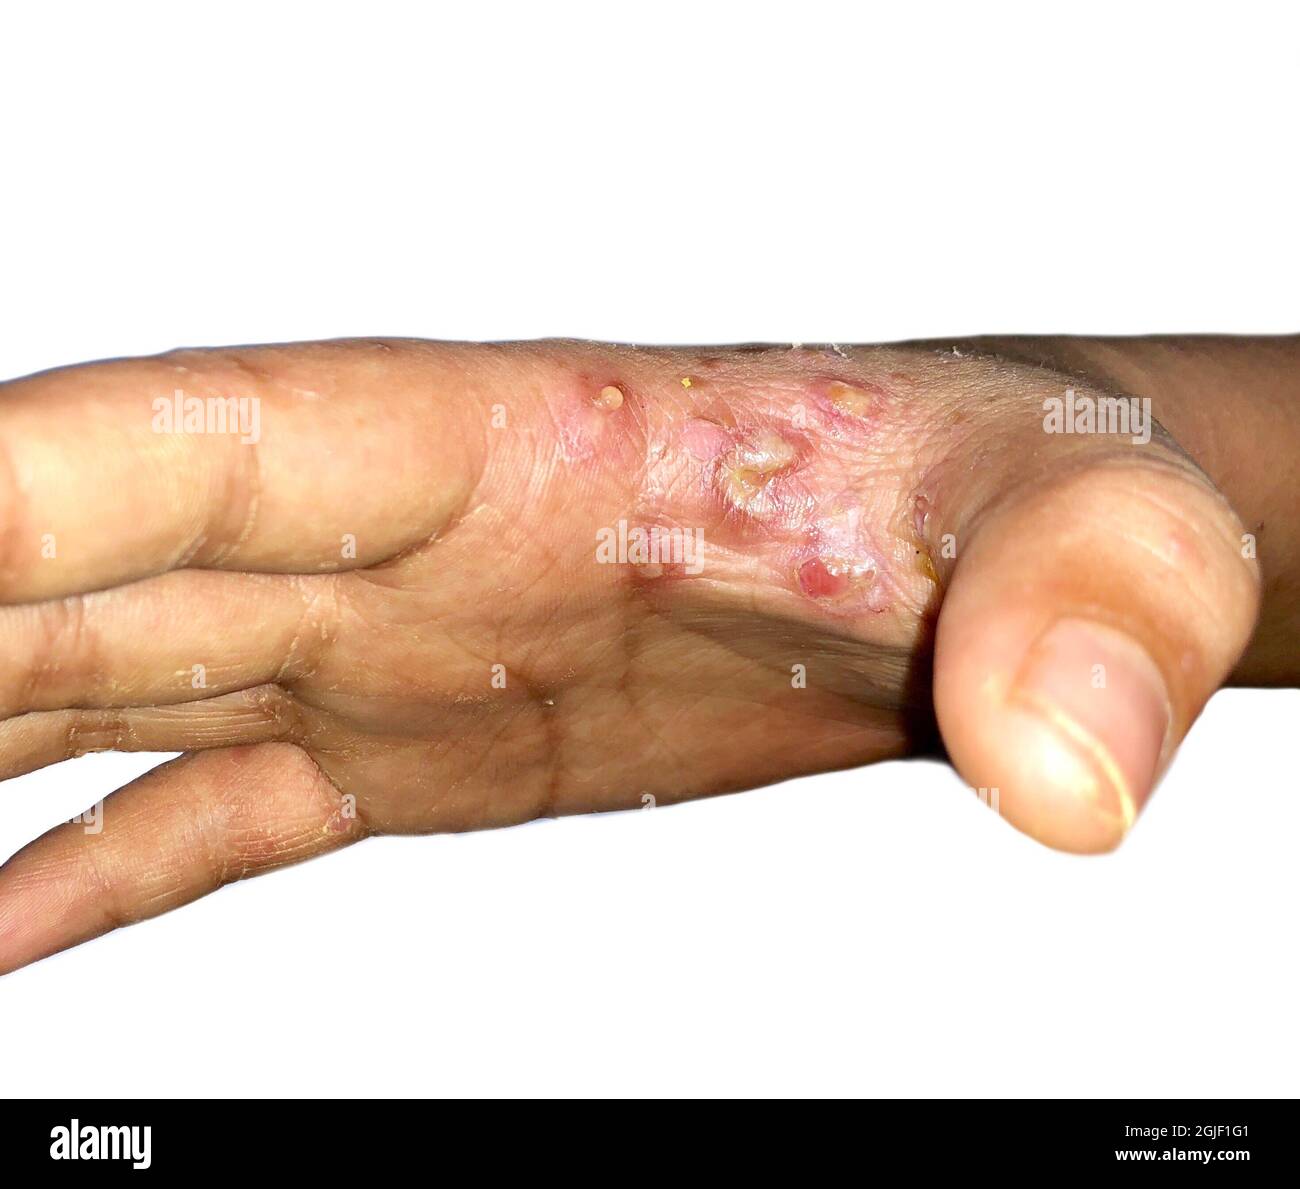 Scabies Infestation with secondary or superimposed bacterial infection and pustules in hand of Southeast Asian, Burmese child. A contagious skin condi Stock Photo